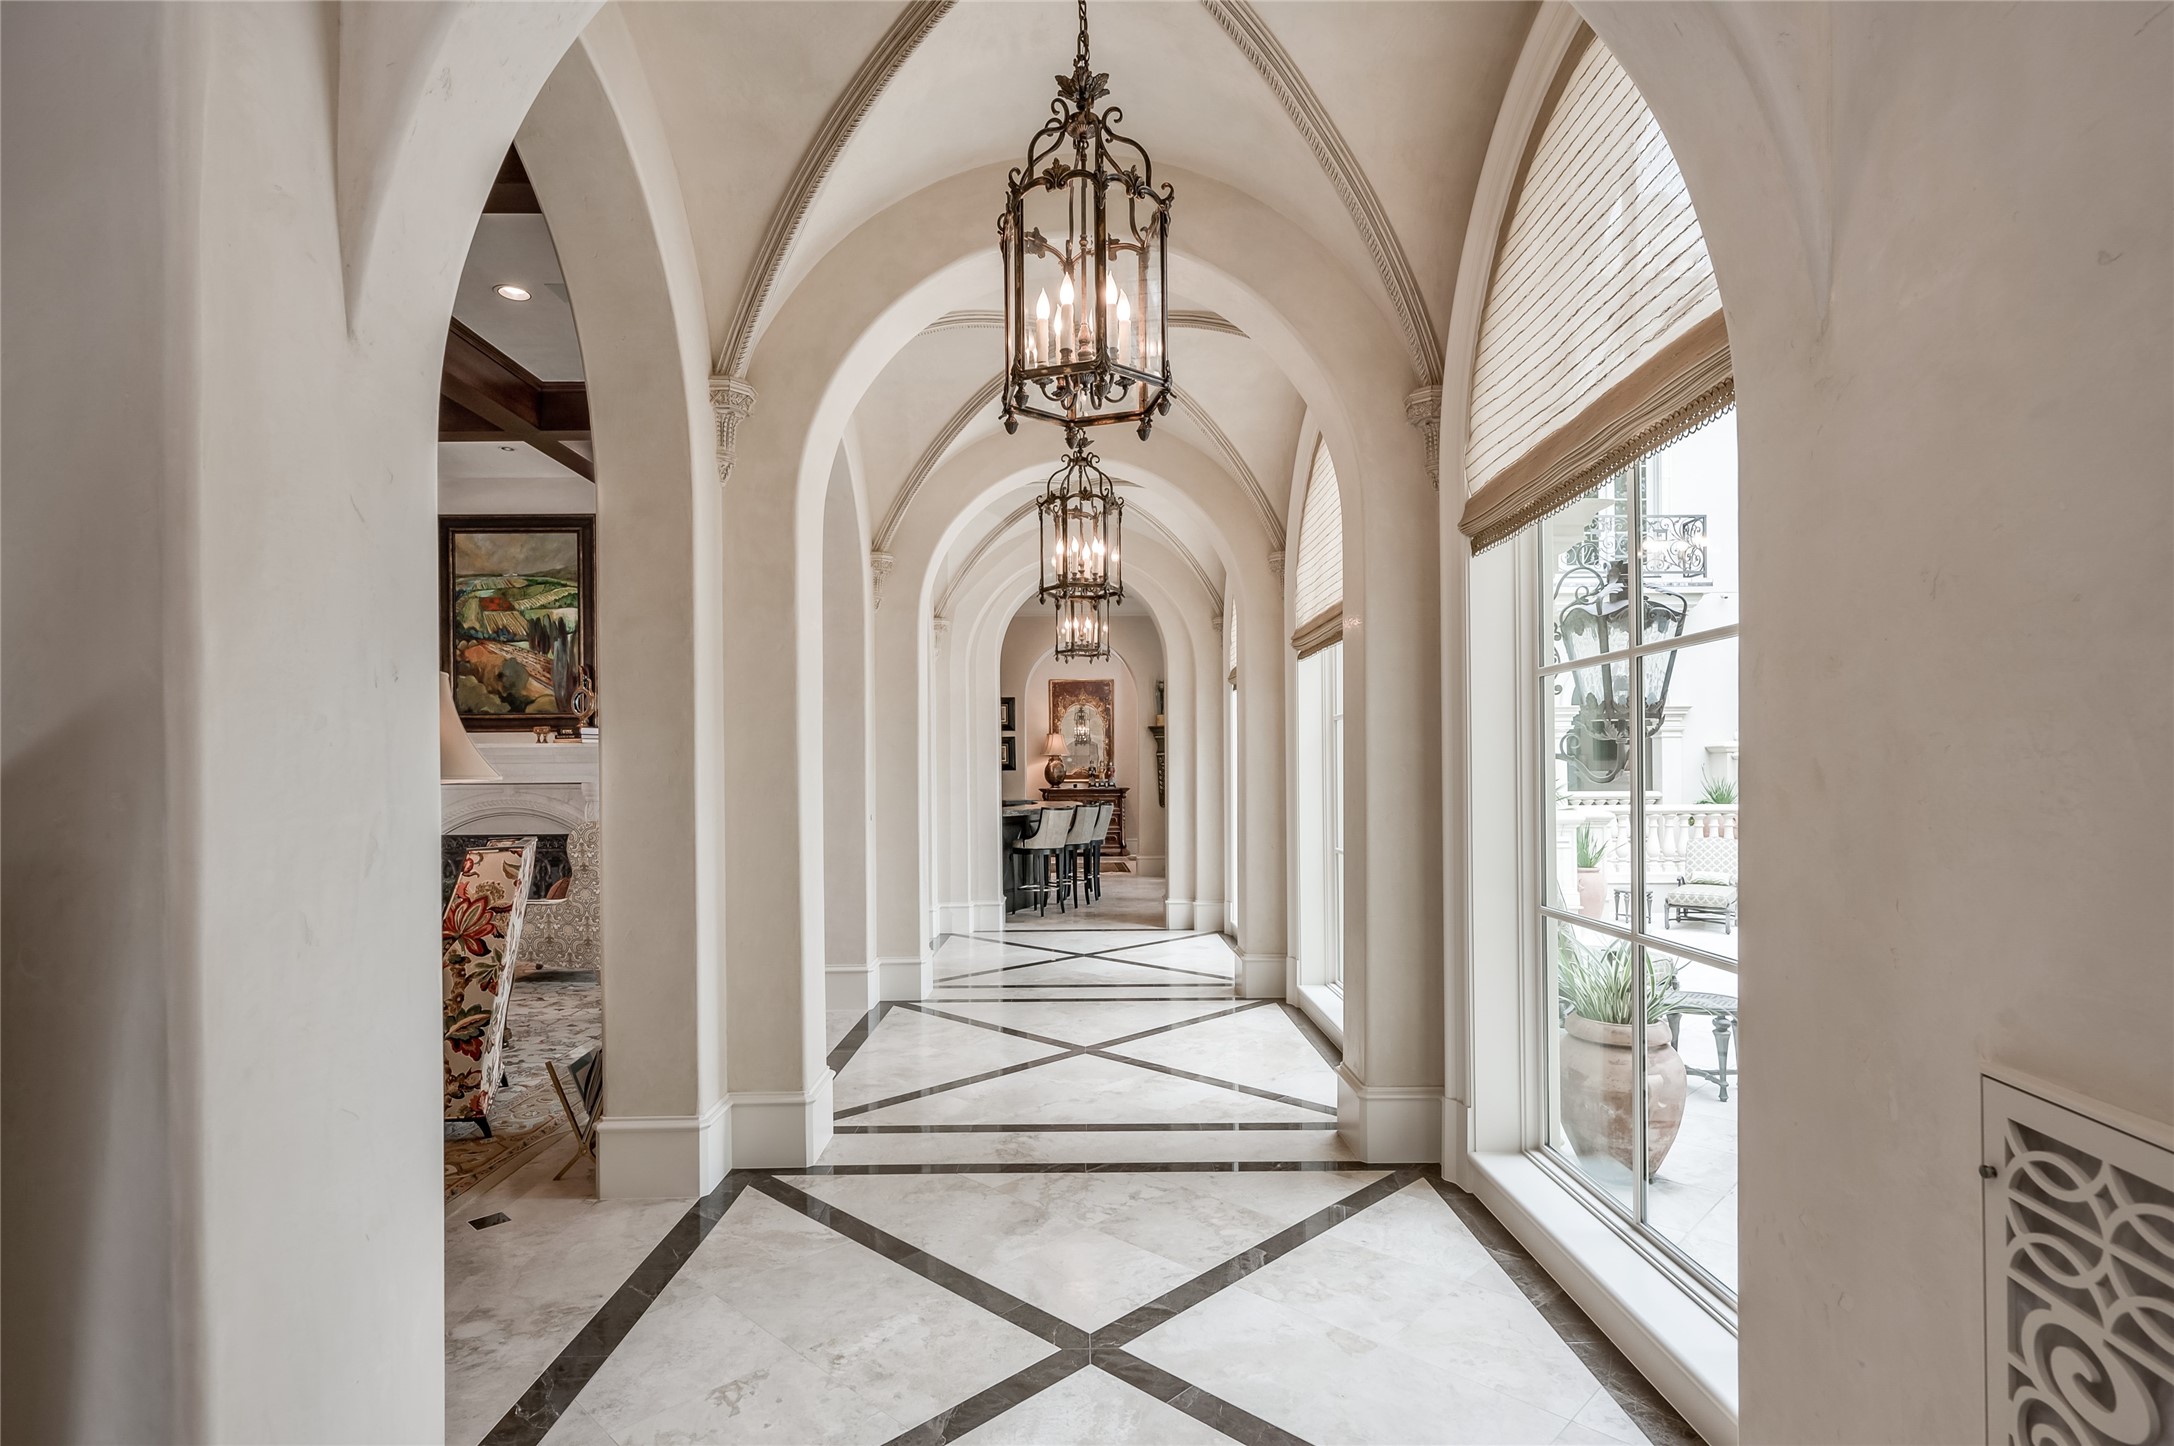 [Gallery]
A wide, groin-vaulted gallery, with an exterior wall of full-length windows that overlook the patios and pool, travels from the foyer to the palatial living room.